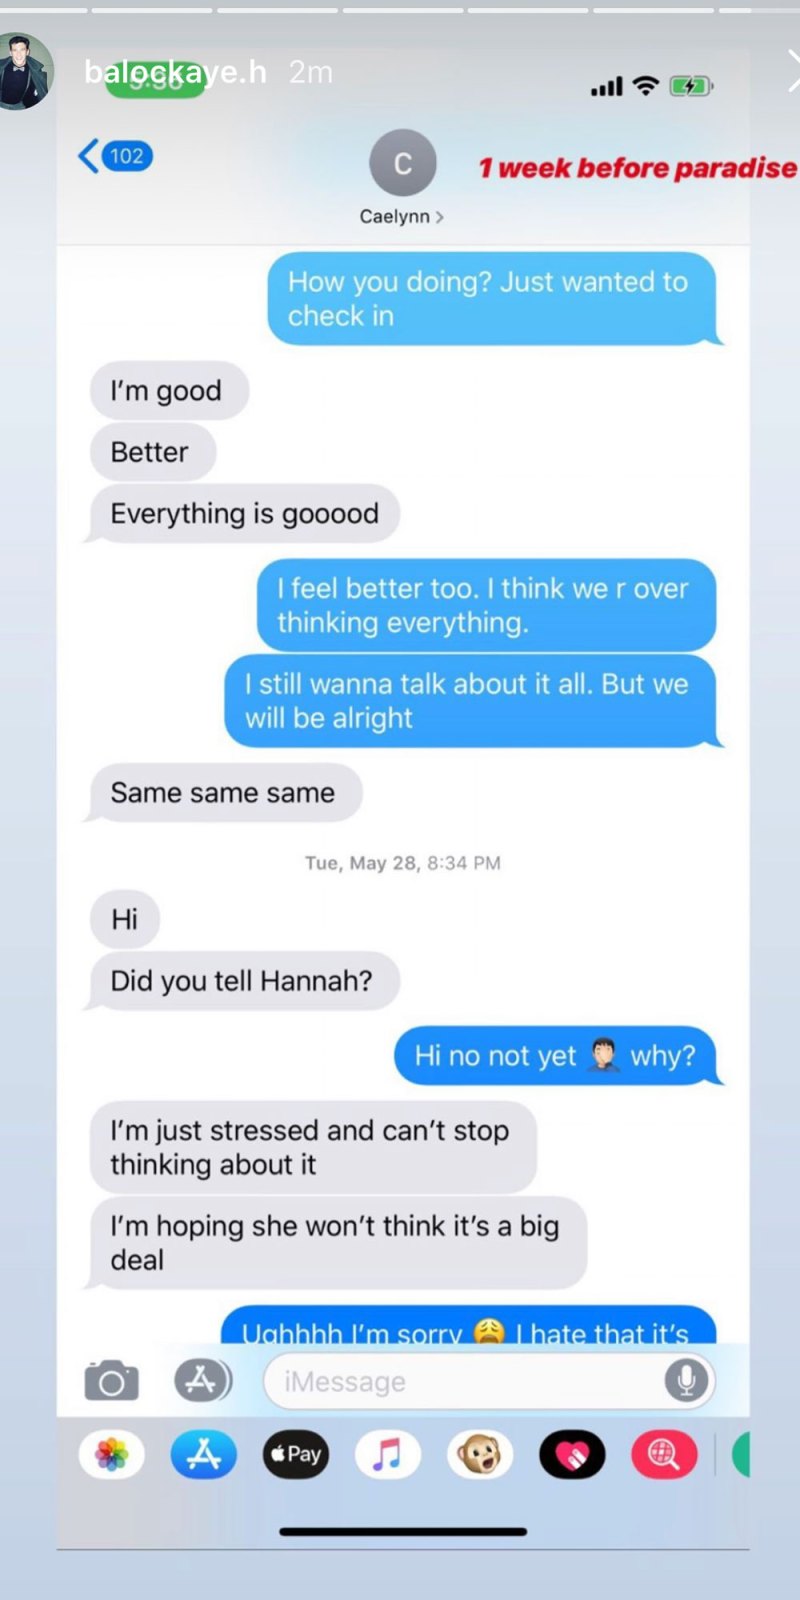 Bachelor in Paradise’s Blake Horstmann Releases His Texts With Caelynn Miller-Keyes From the Night They Had Sex